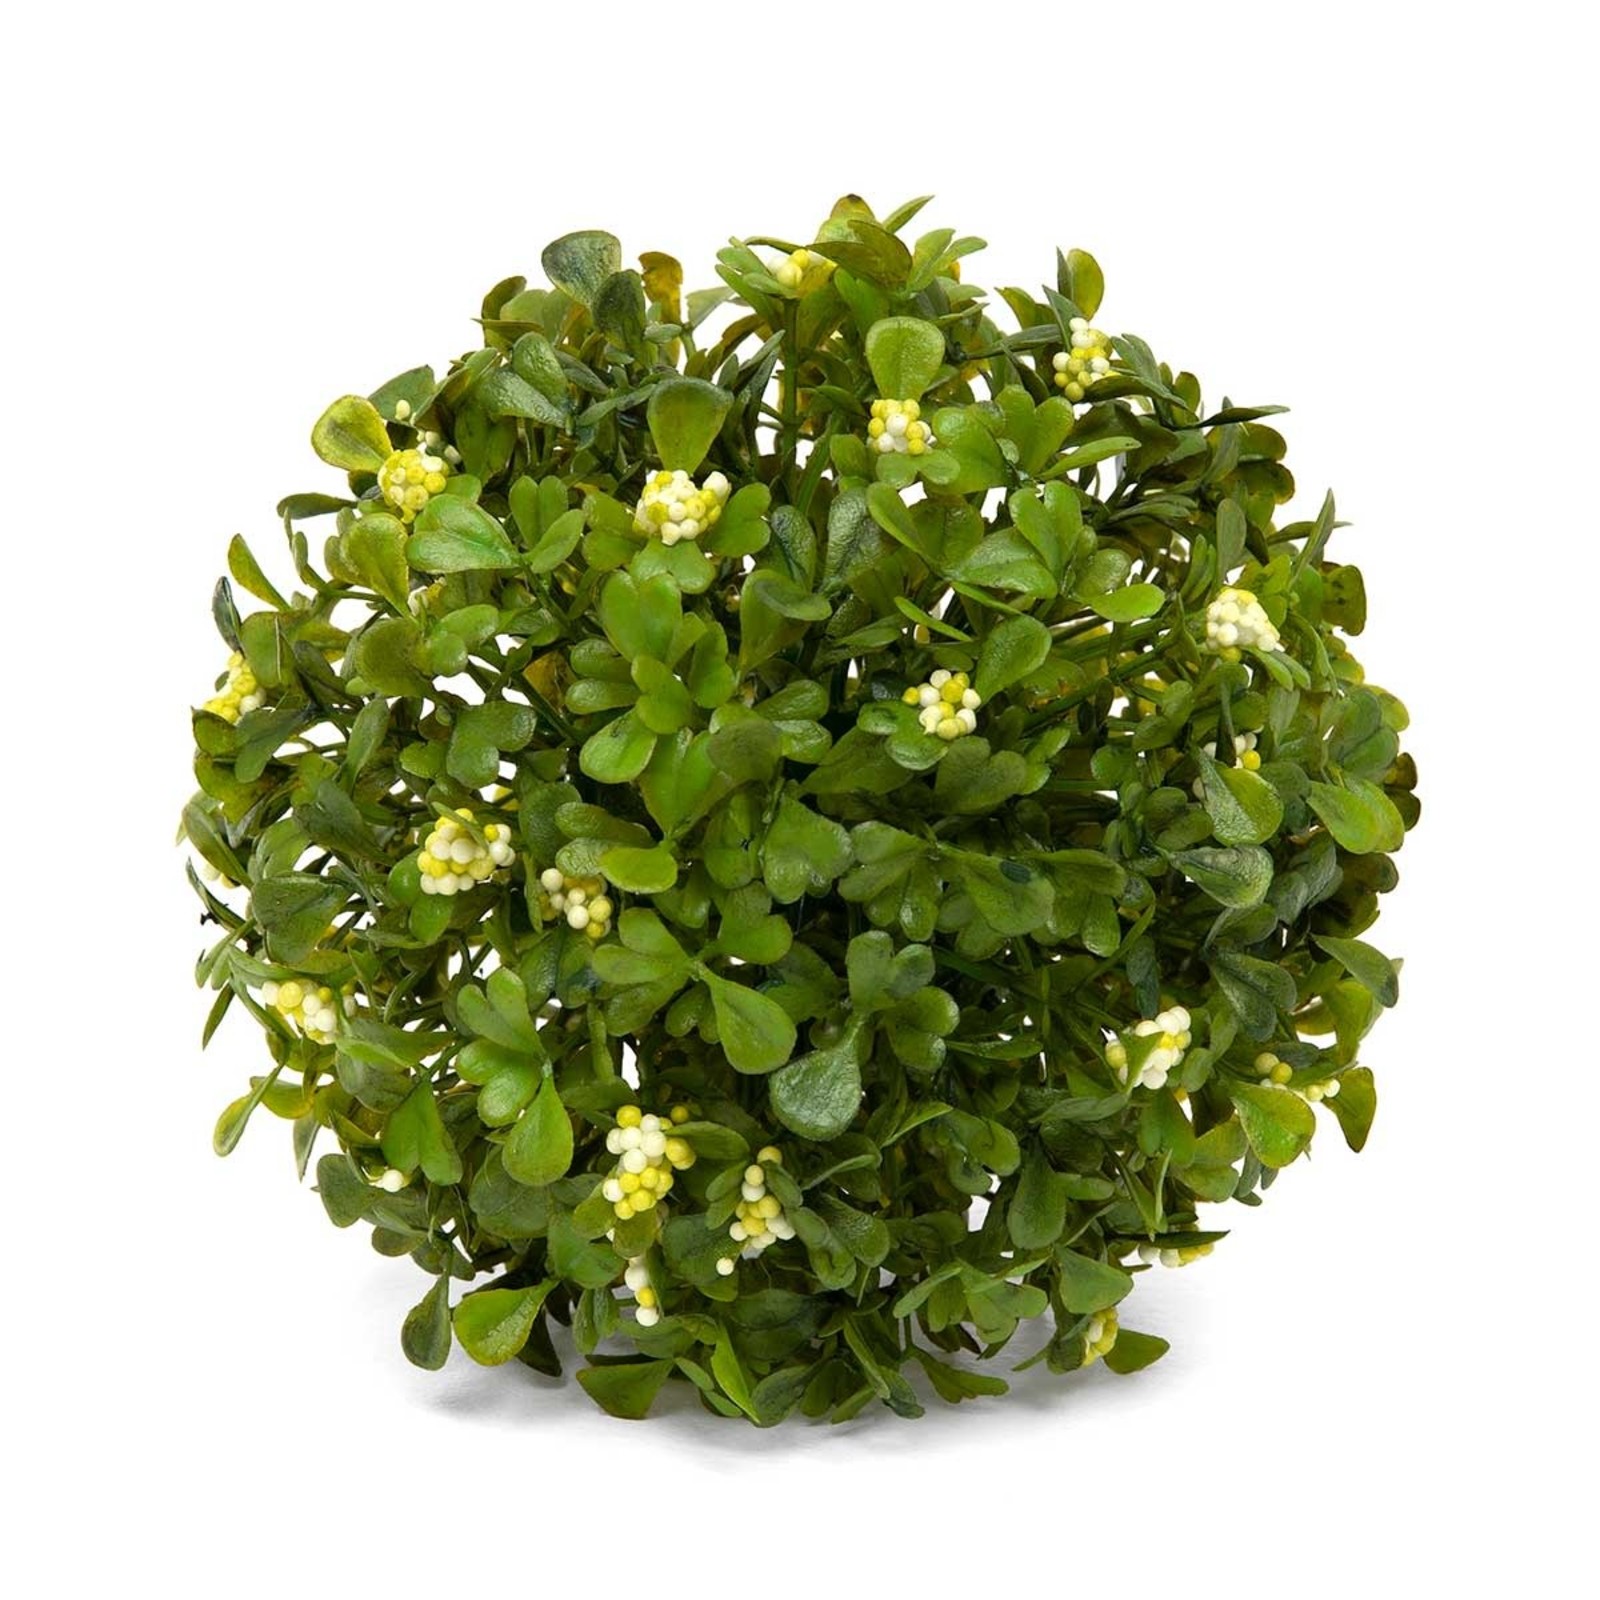 Meravic BOXWOOD BALL WITH WHITE BERRIES 5"   E2247 loading=